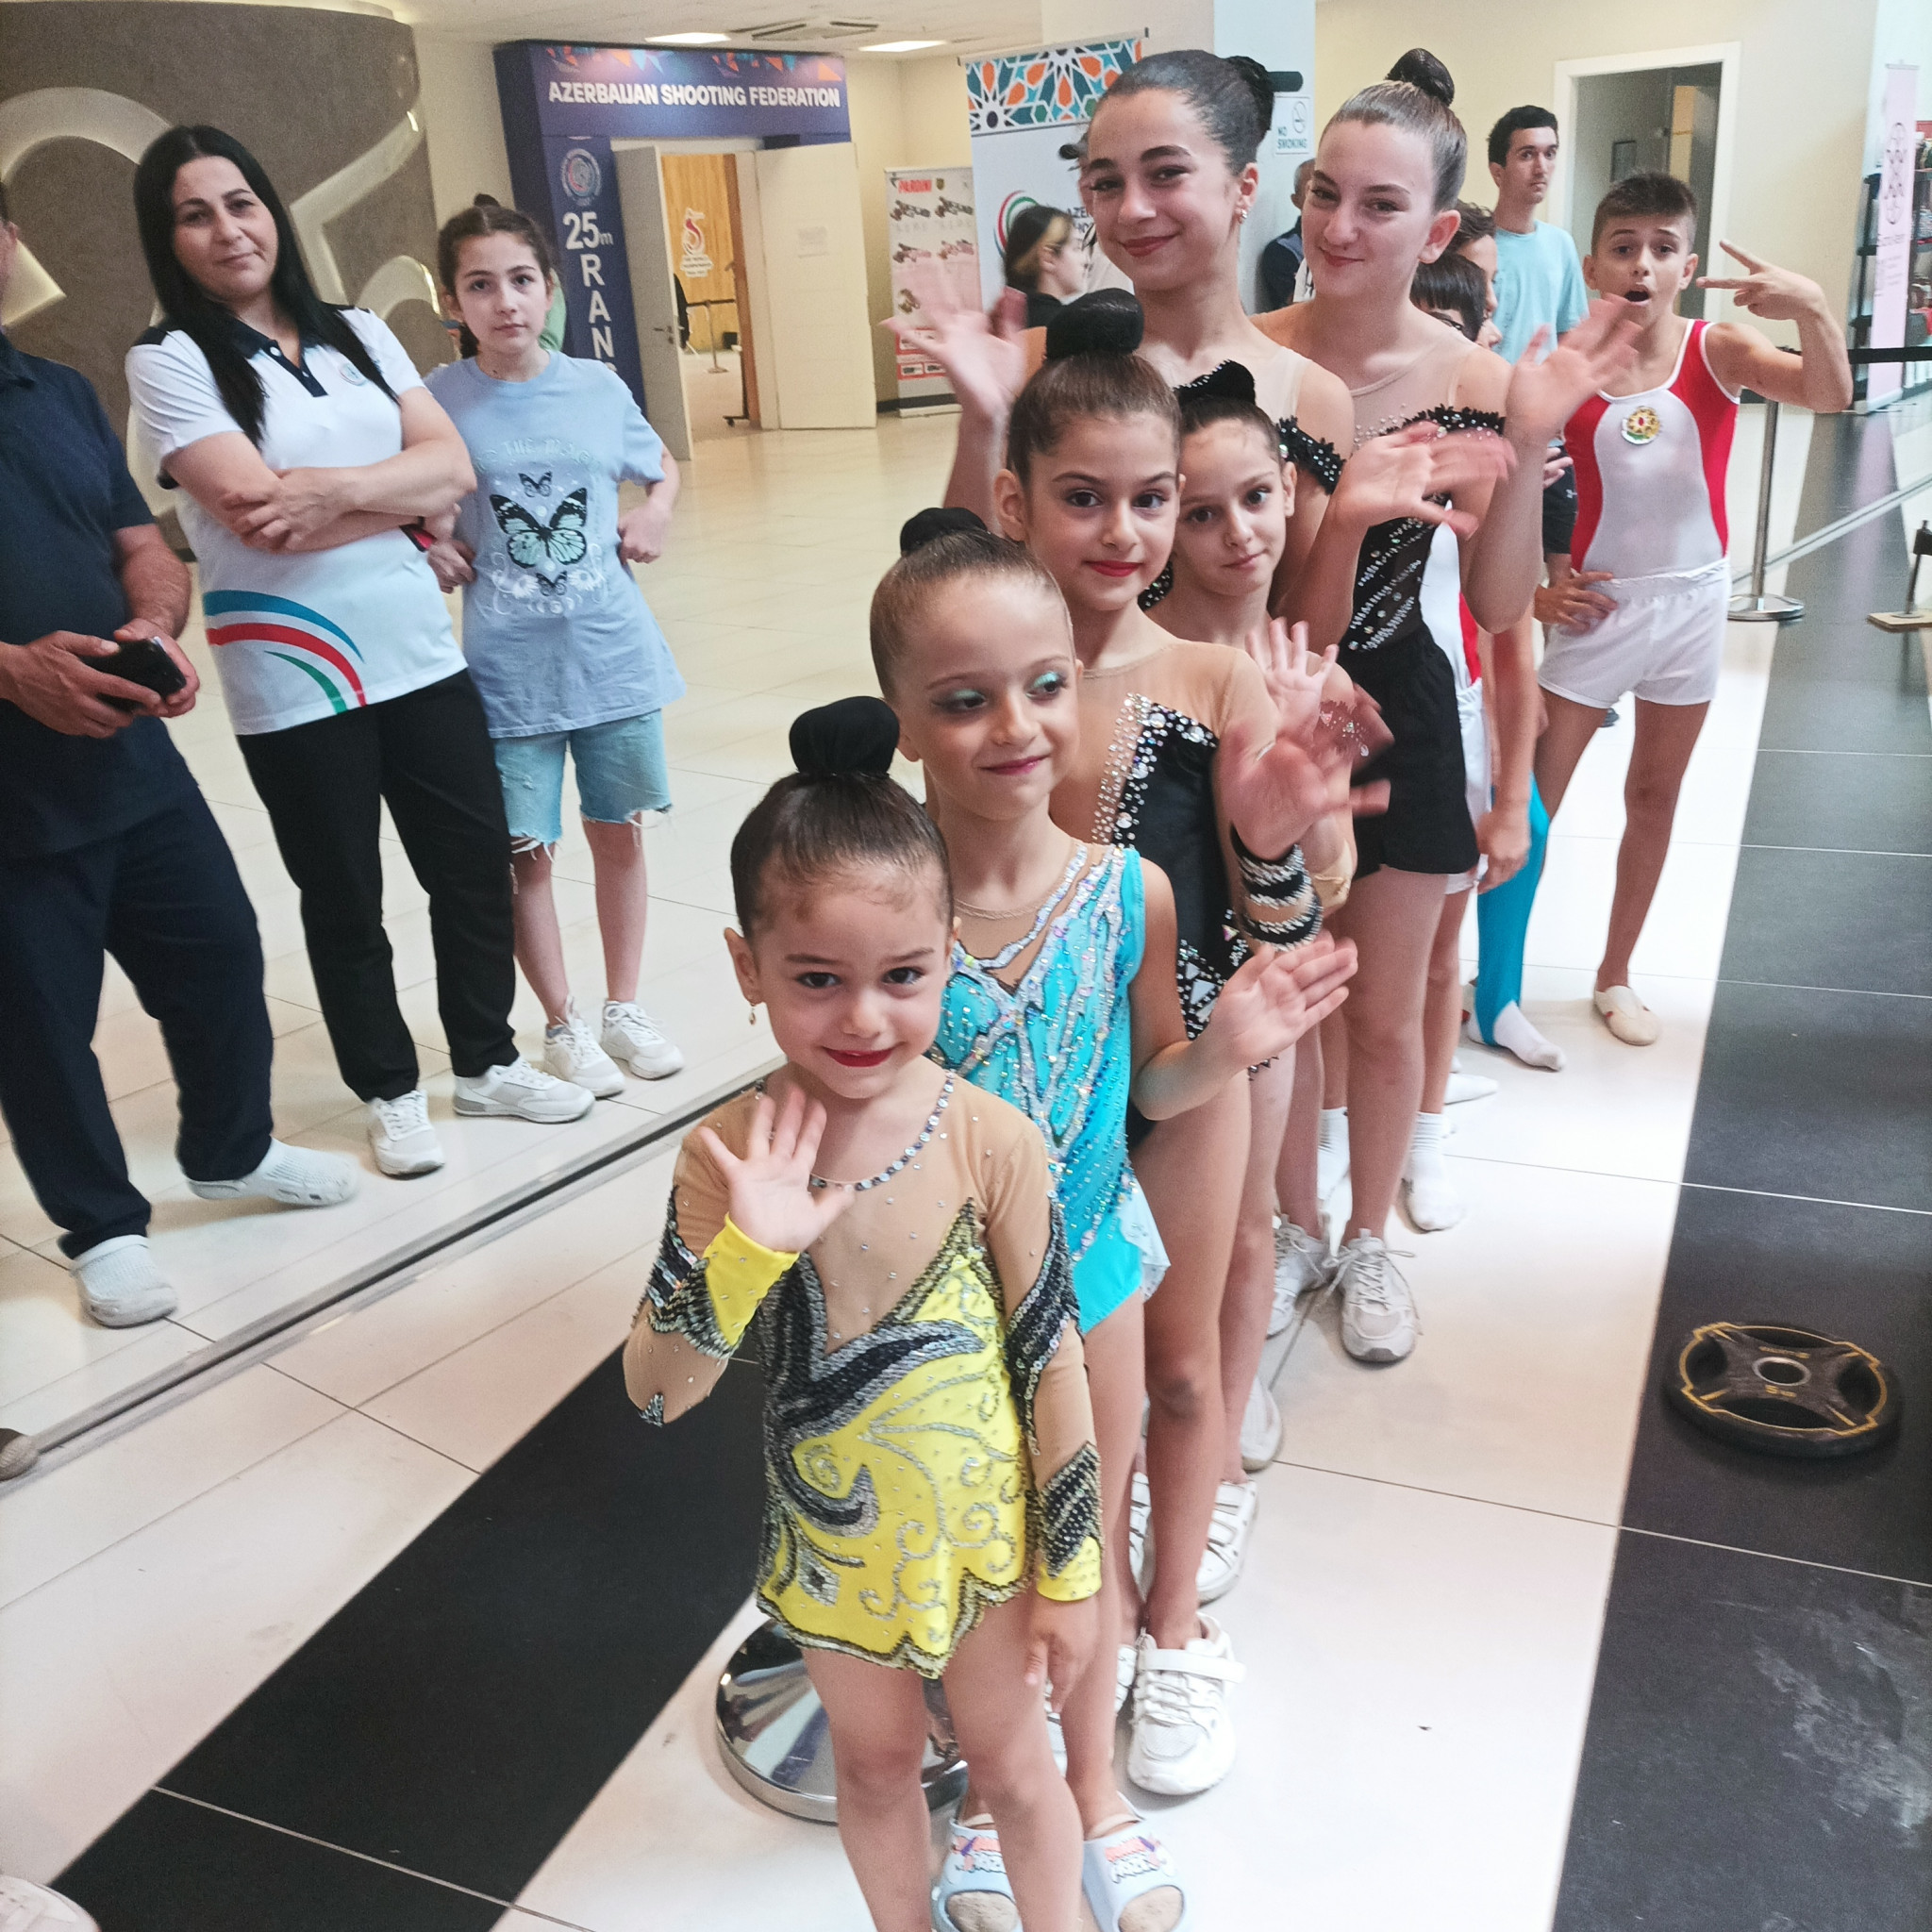 A group of gymnasts are ready to perform for visitors at the ISSF World Shooting Championships ©ITG